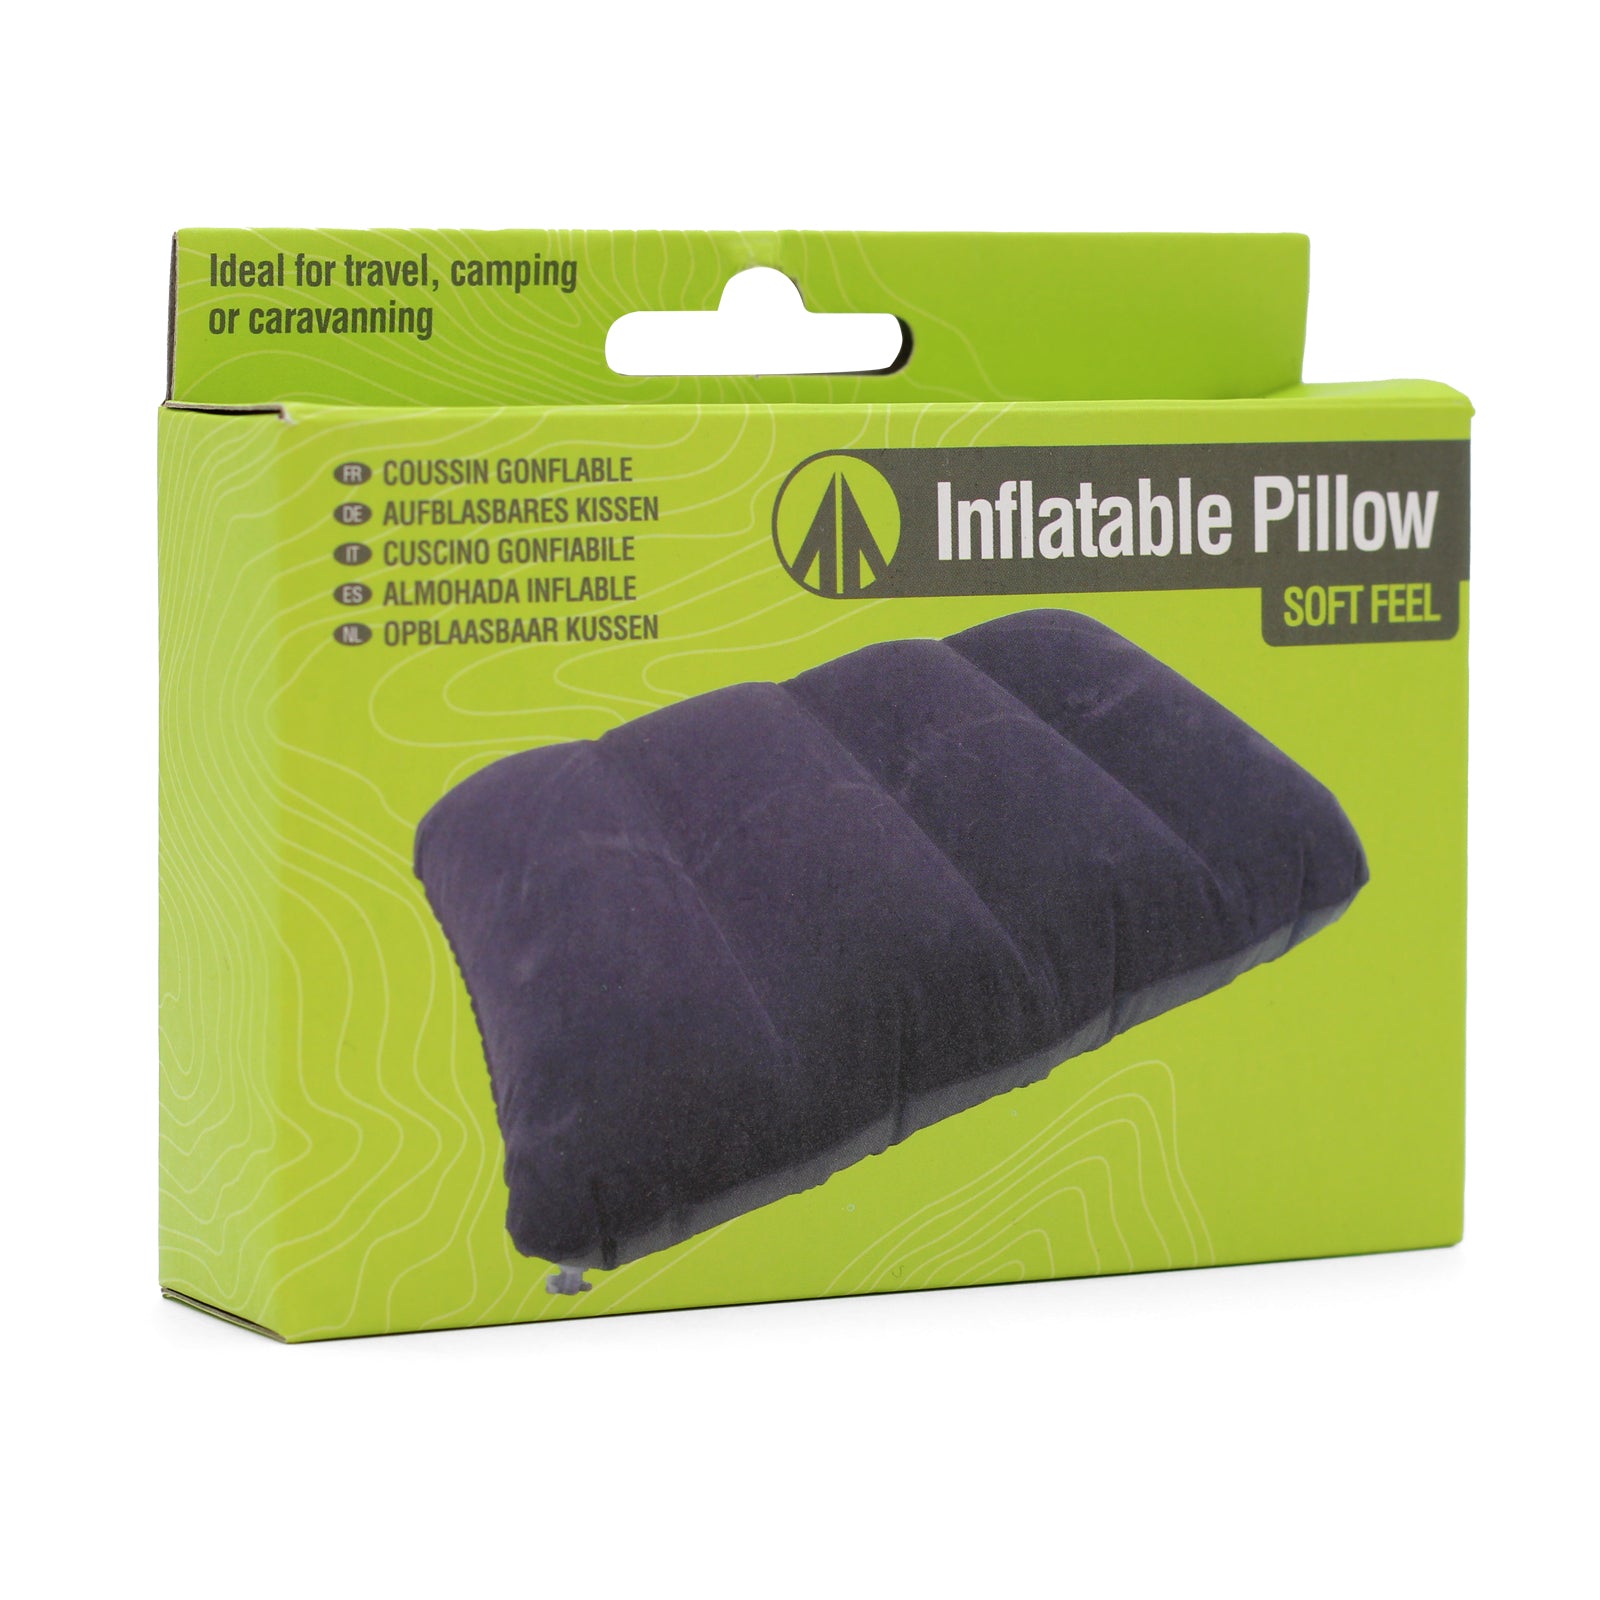 Inflatable Pillow Soft Feel in Box